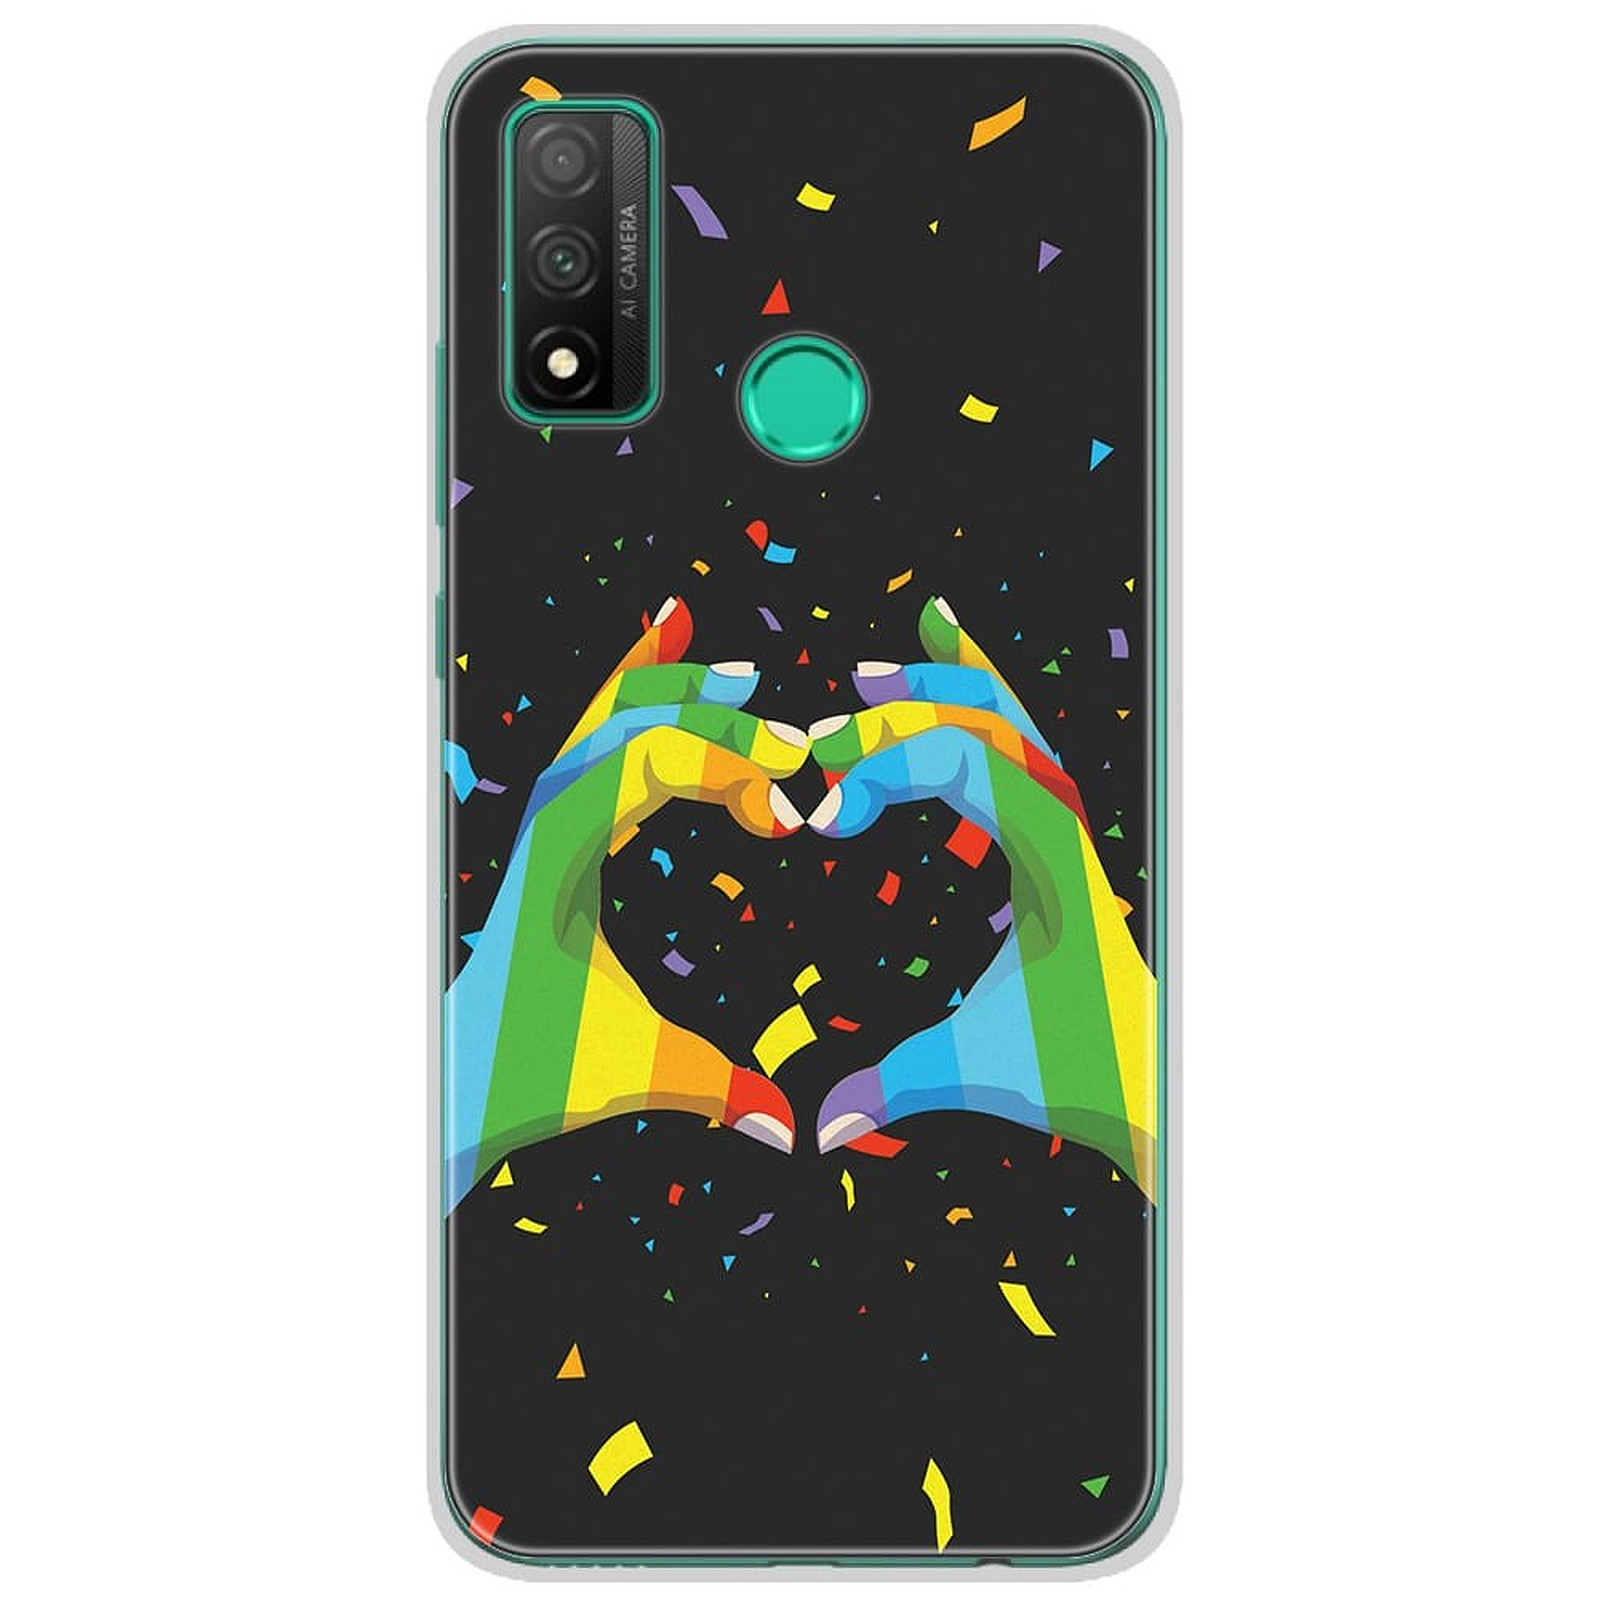 1001 Coques Coque silicone gel Huawei P Smart 2020 motif LGBT - Coque telephone 1001Coques